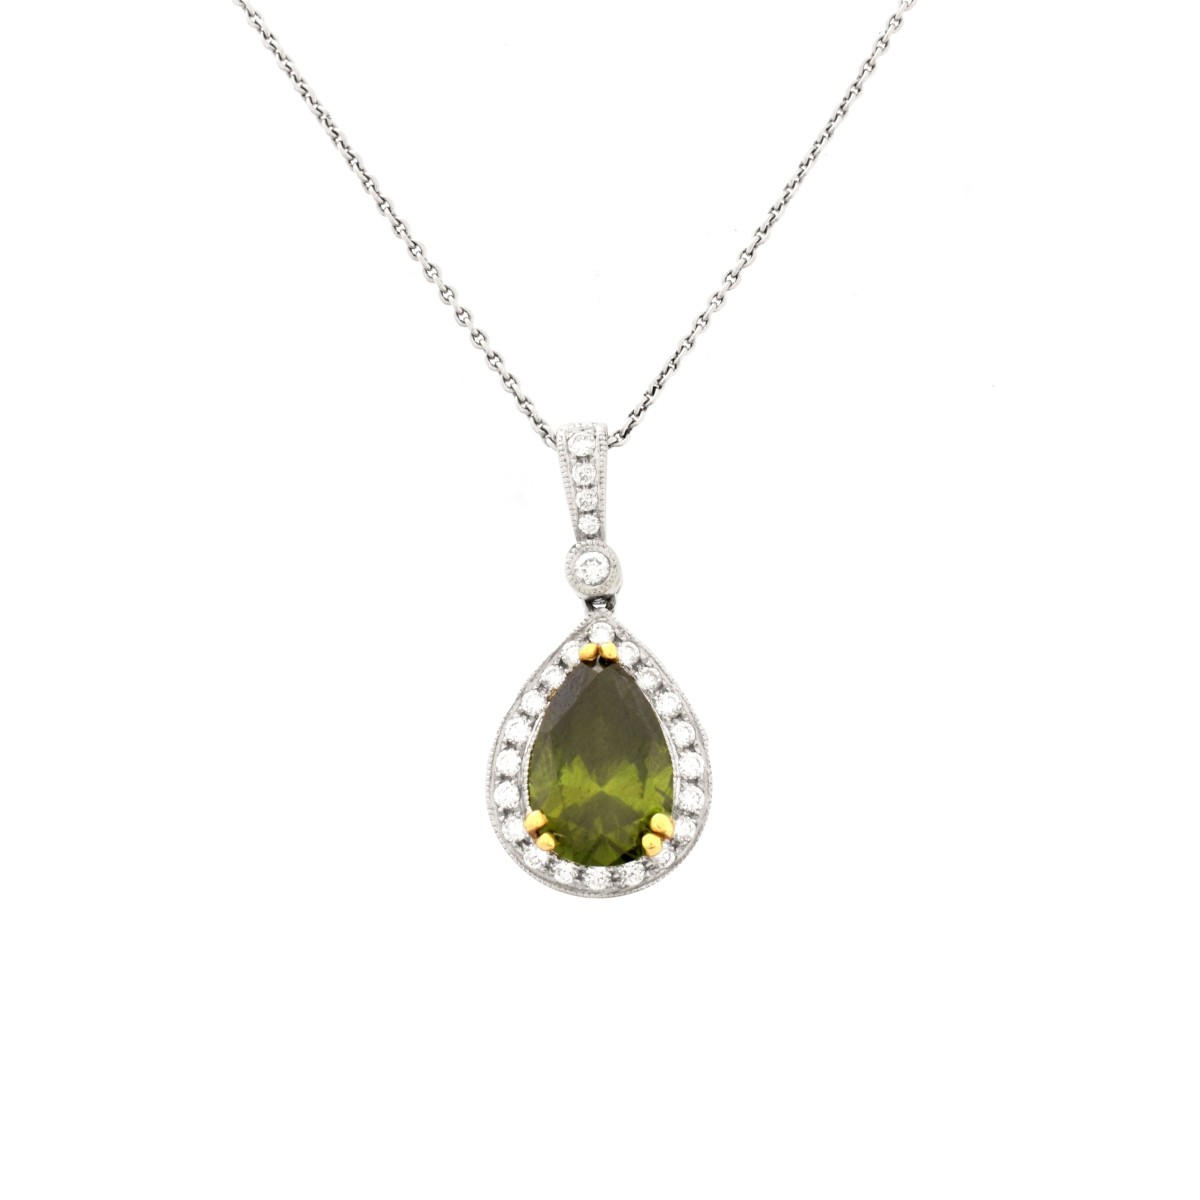 Green Diamond and 18K Necklace